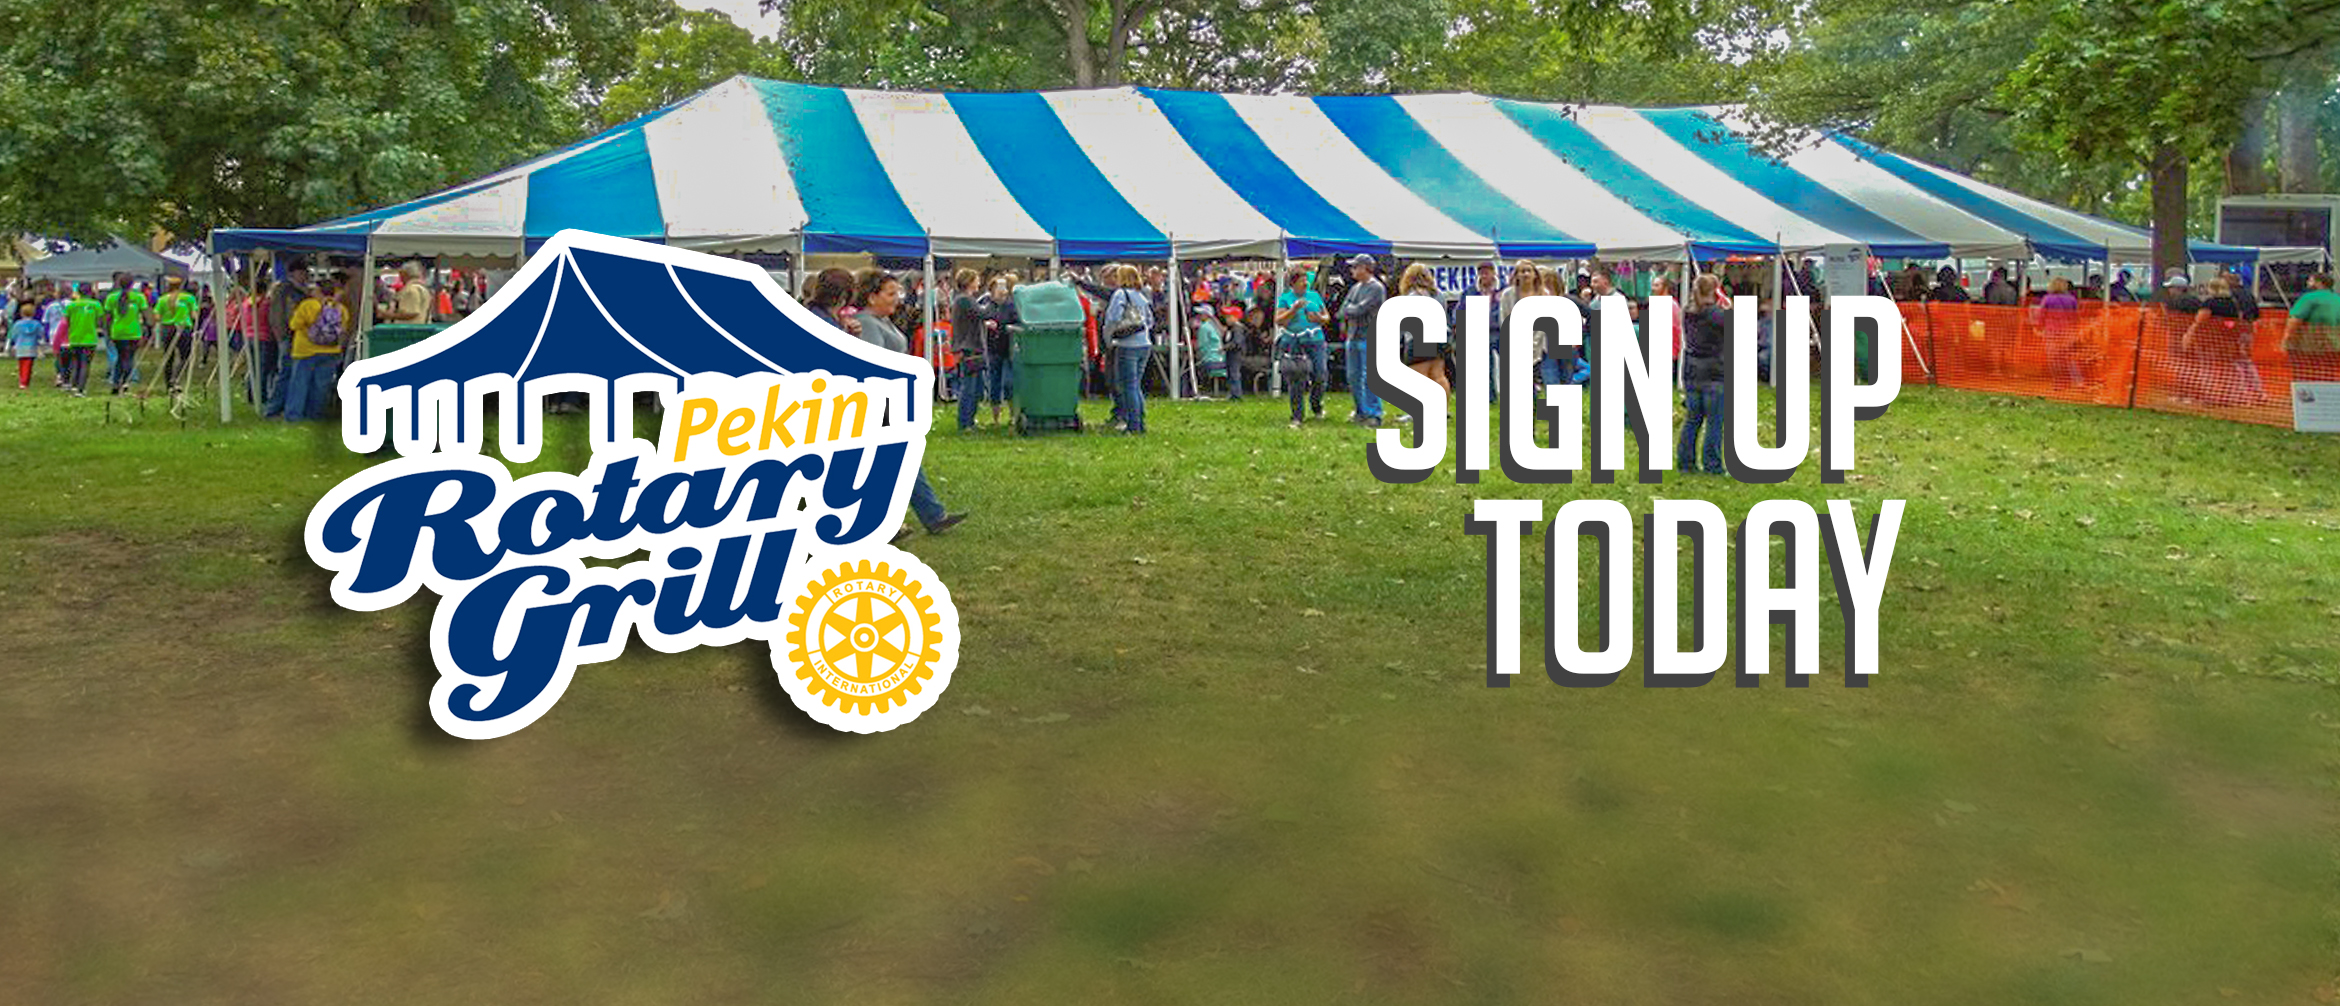 Rotary Grill Sign Up